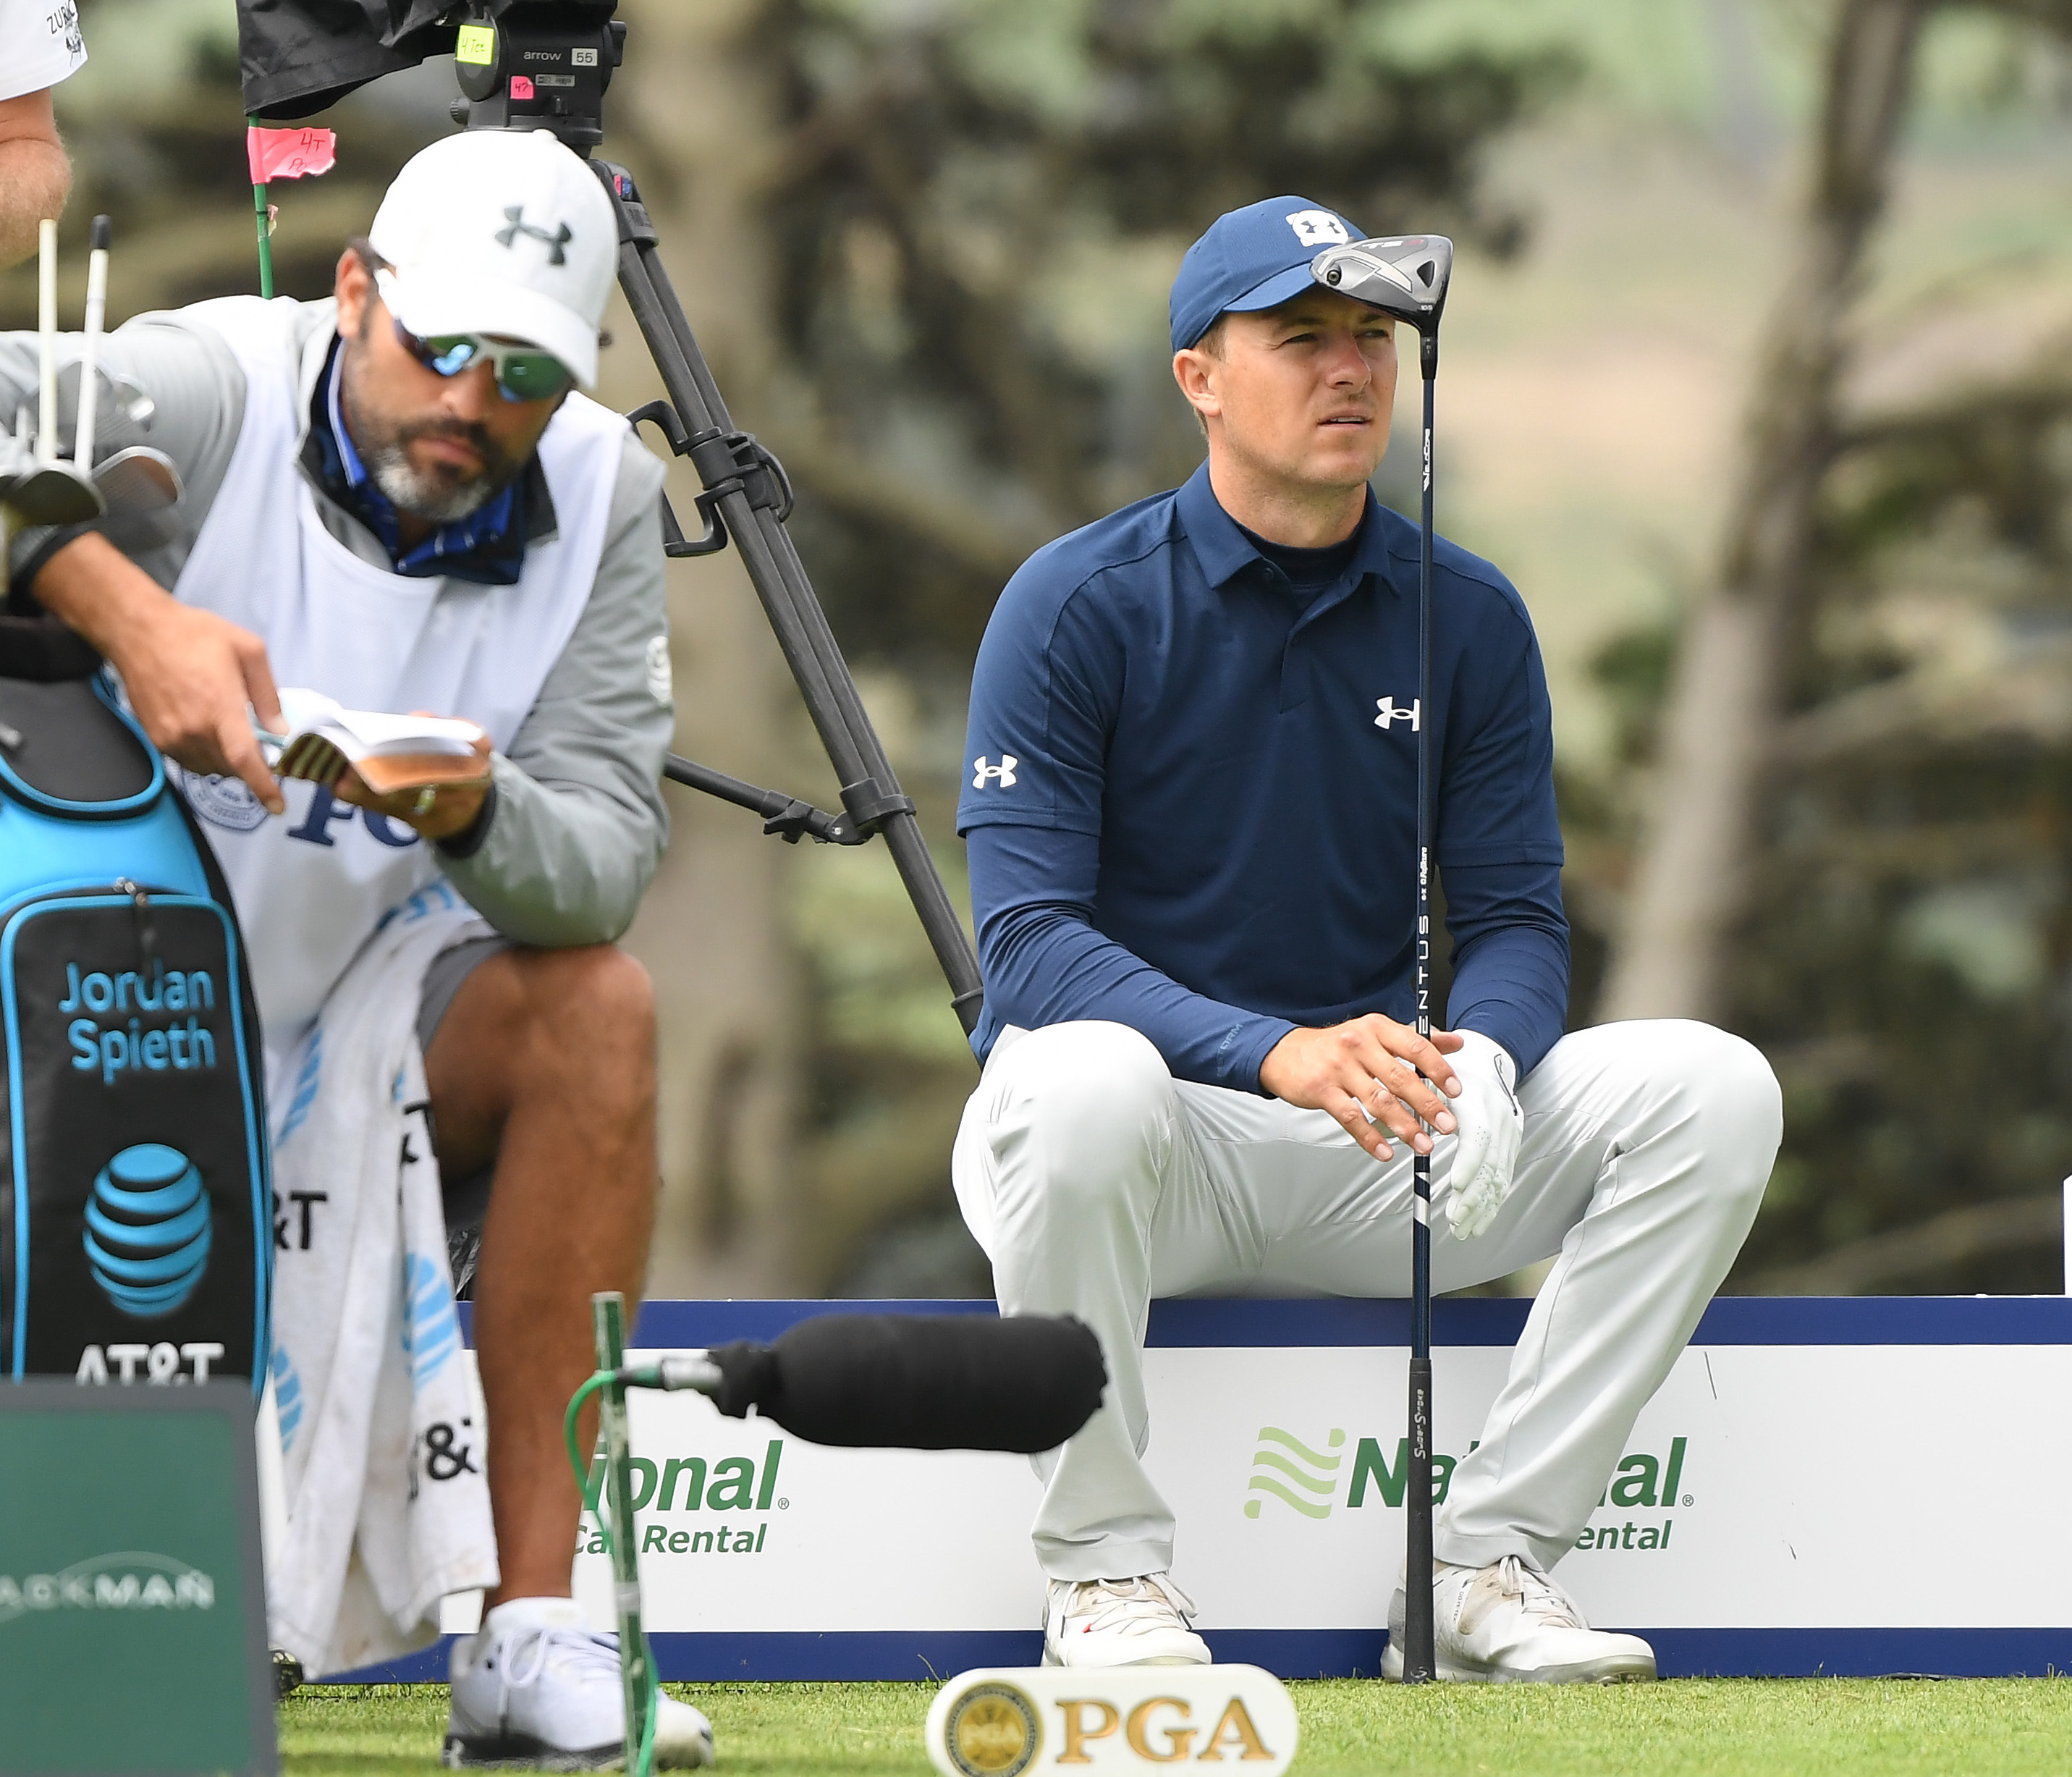 PGA Championship 2020: Two pictures sadly sum up just how lost Jordan Spieth  is with his game | Golf News and Tour Information | GolfDigest.com